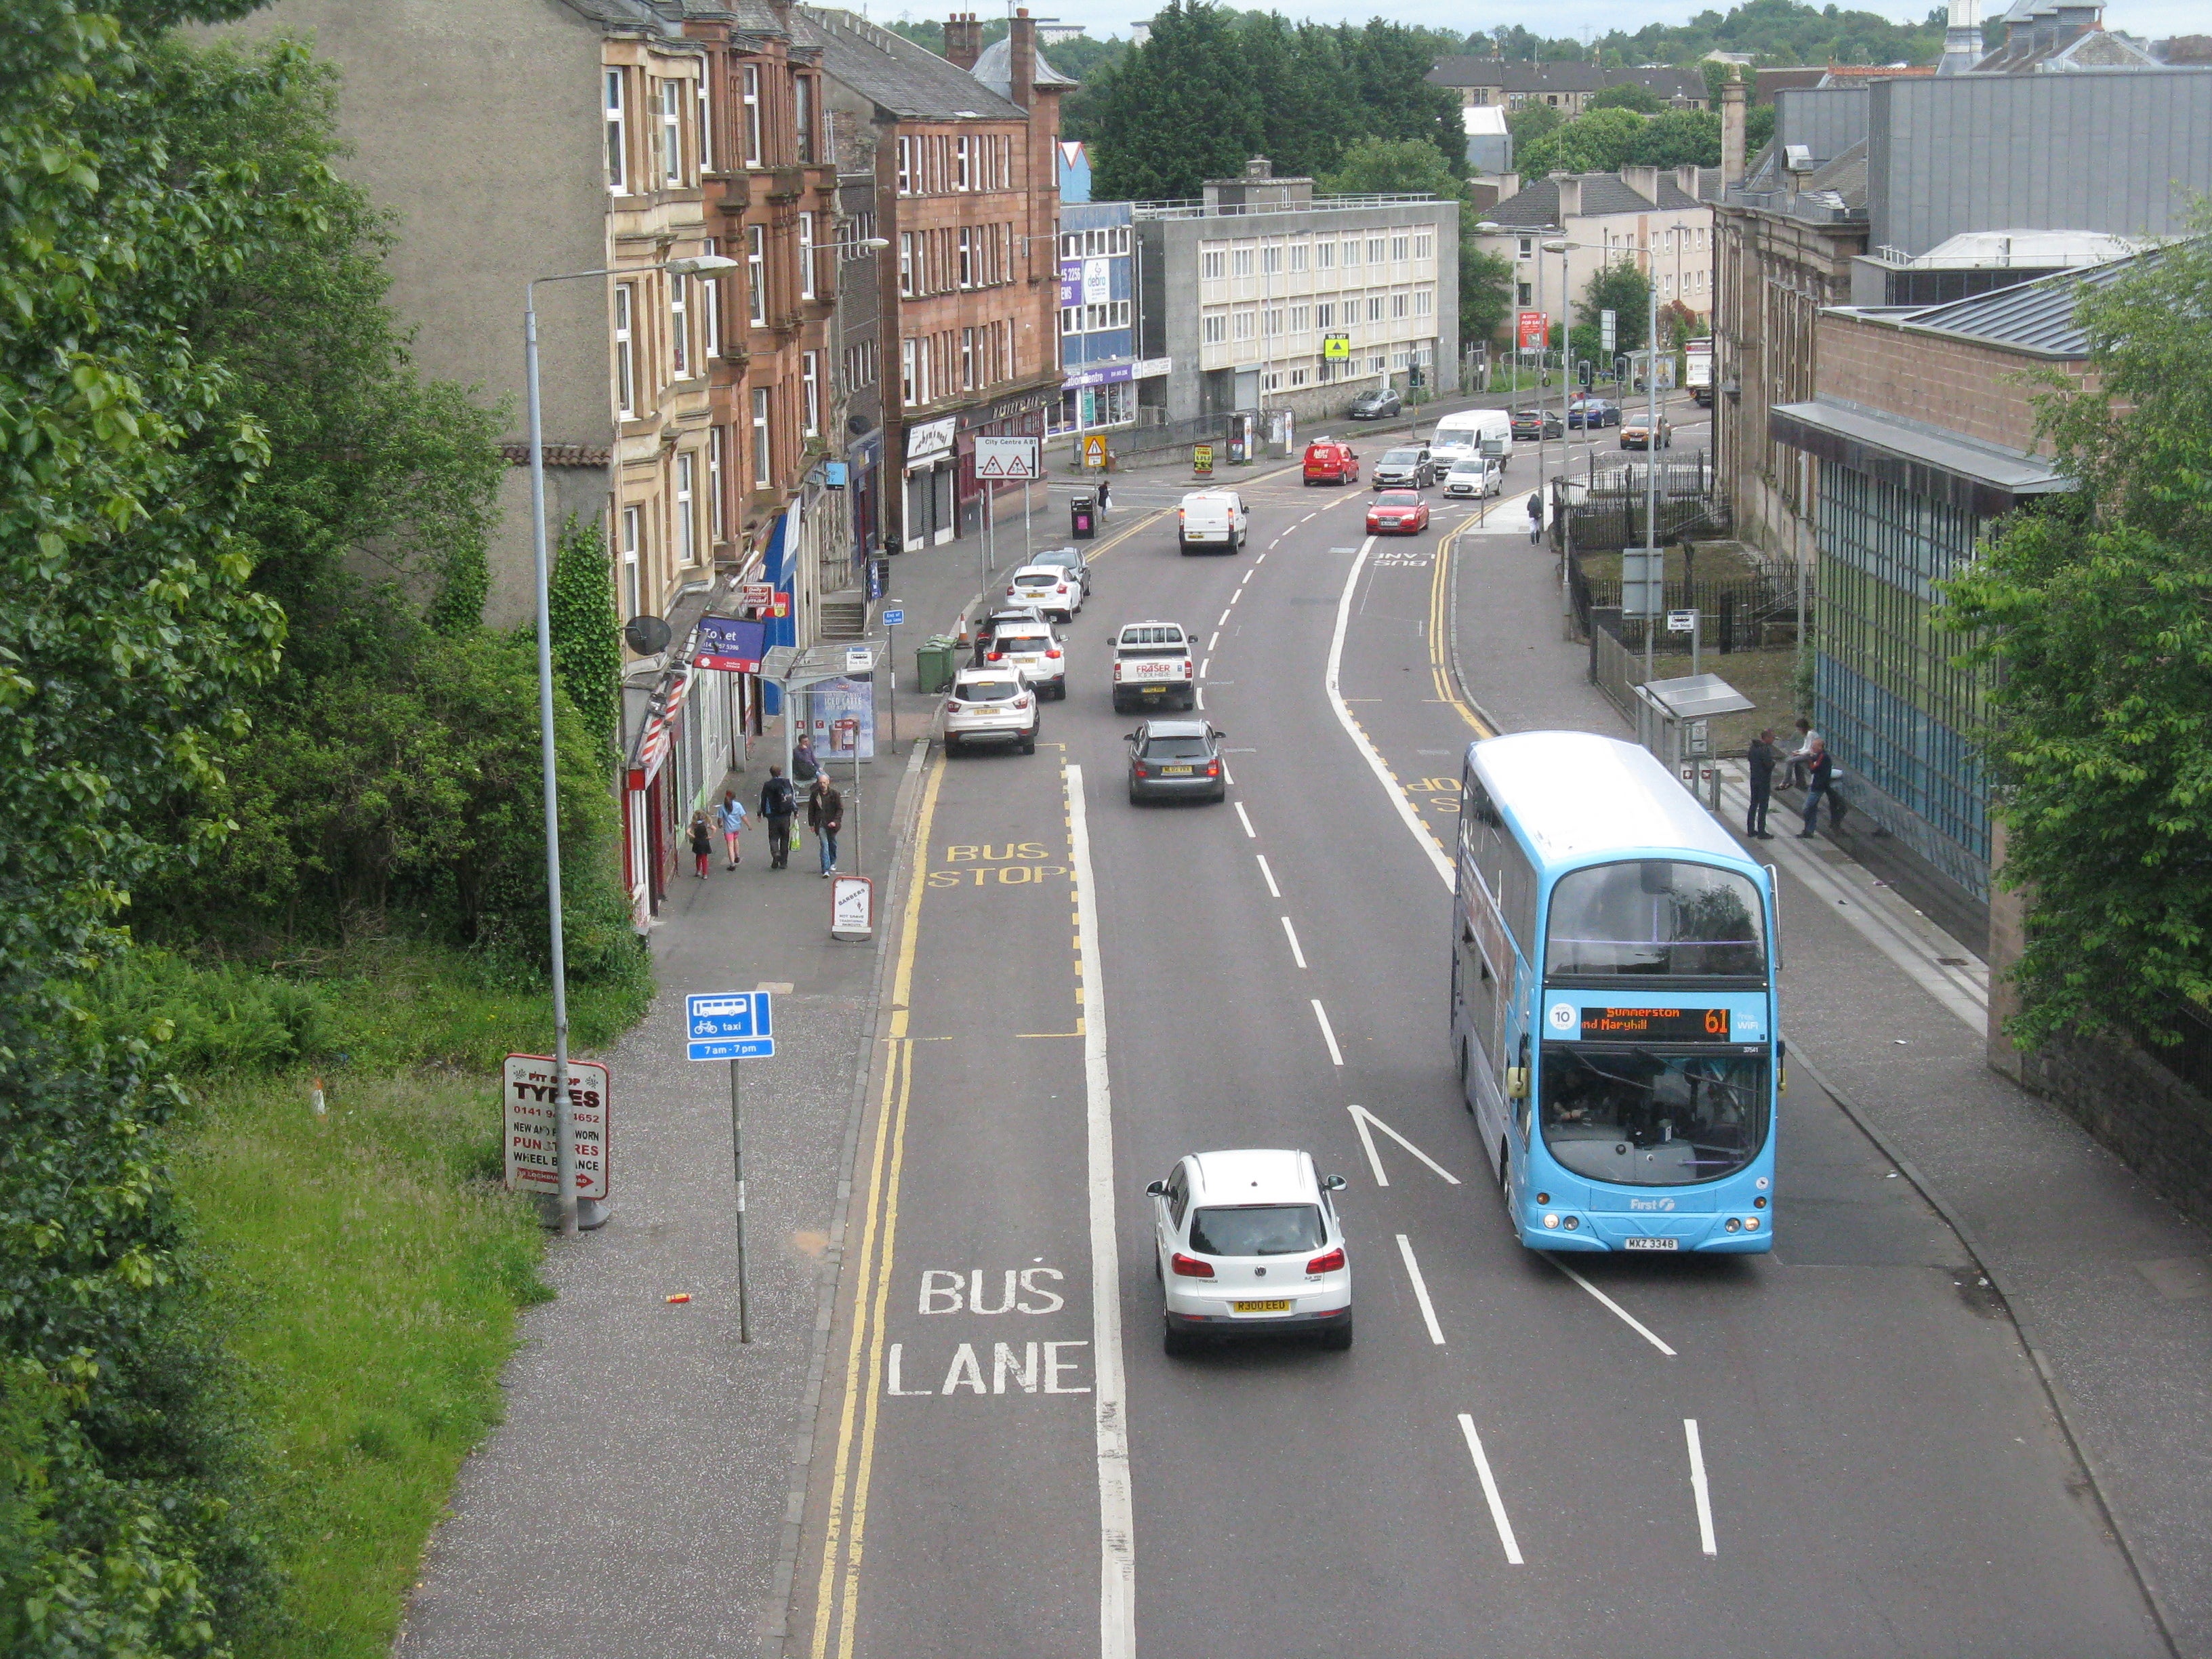 Maryhill Road in Glasgow where life expectancy is more than a decade shorter than in the prosperous suburbs a mile away